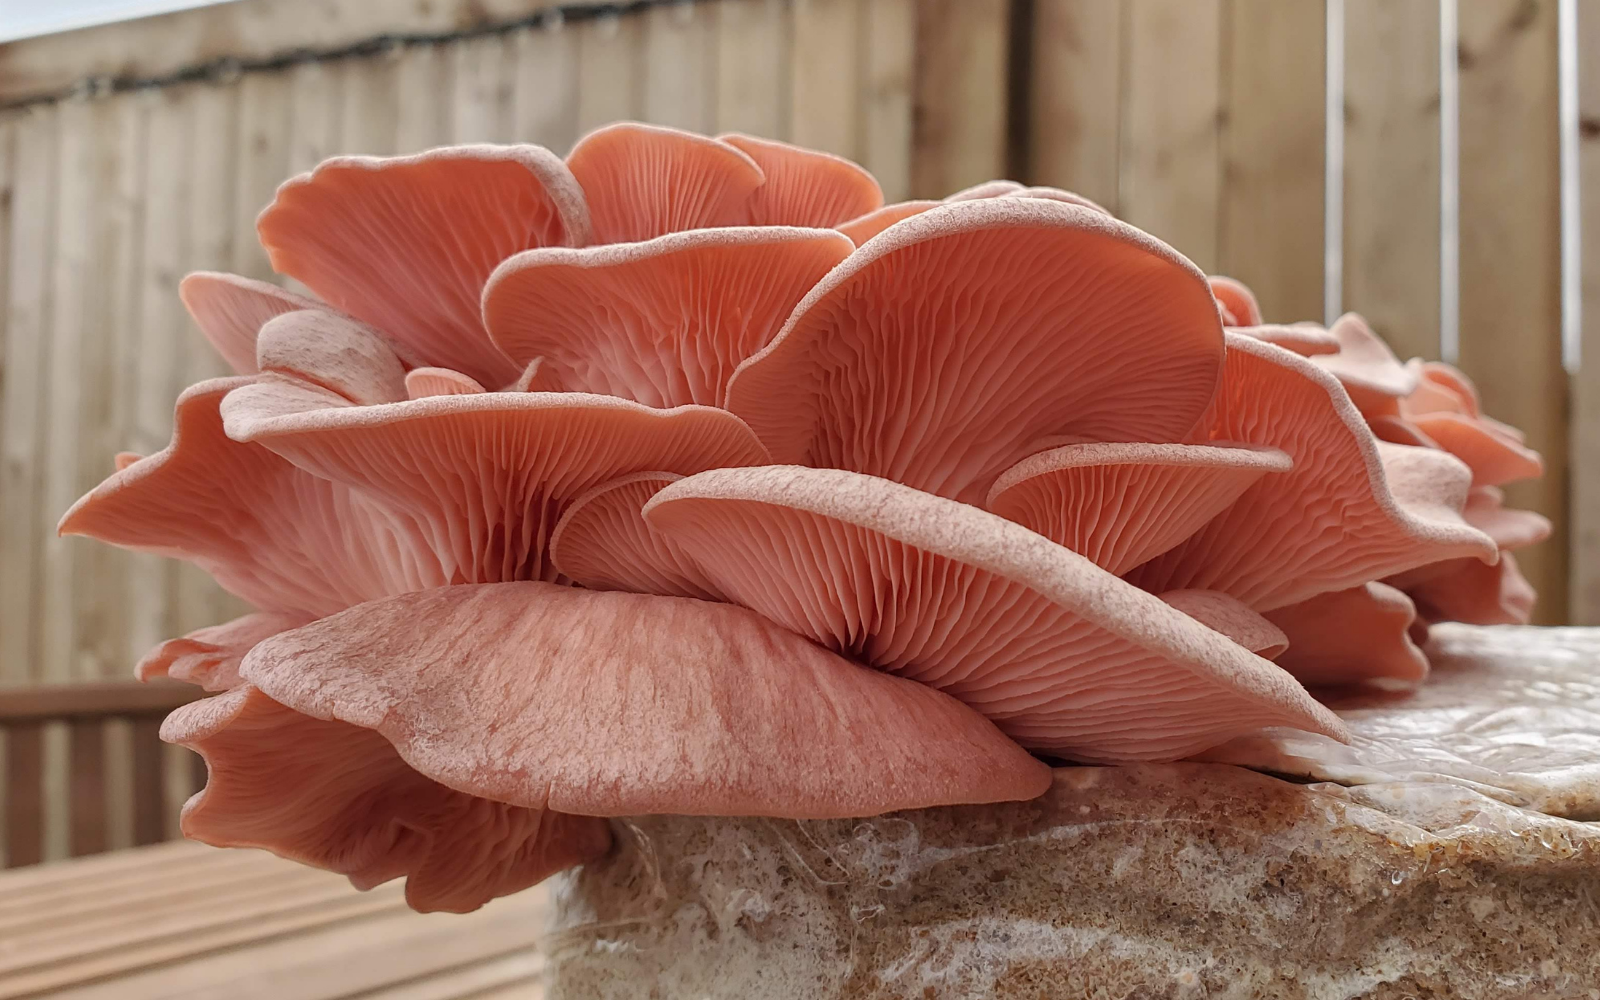 https://learn.freshcap.com/wp-content/uploads/2021/01/pink-oyster-mushrooms.png